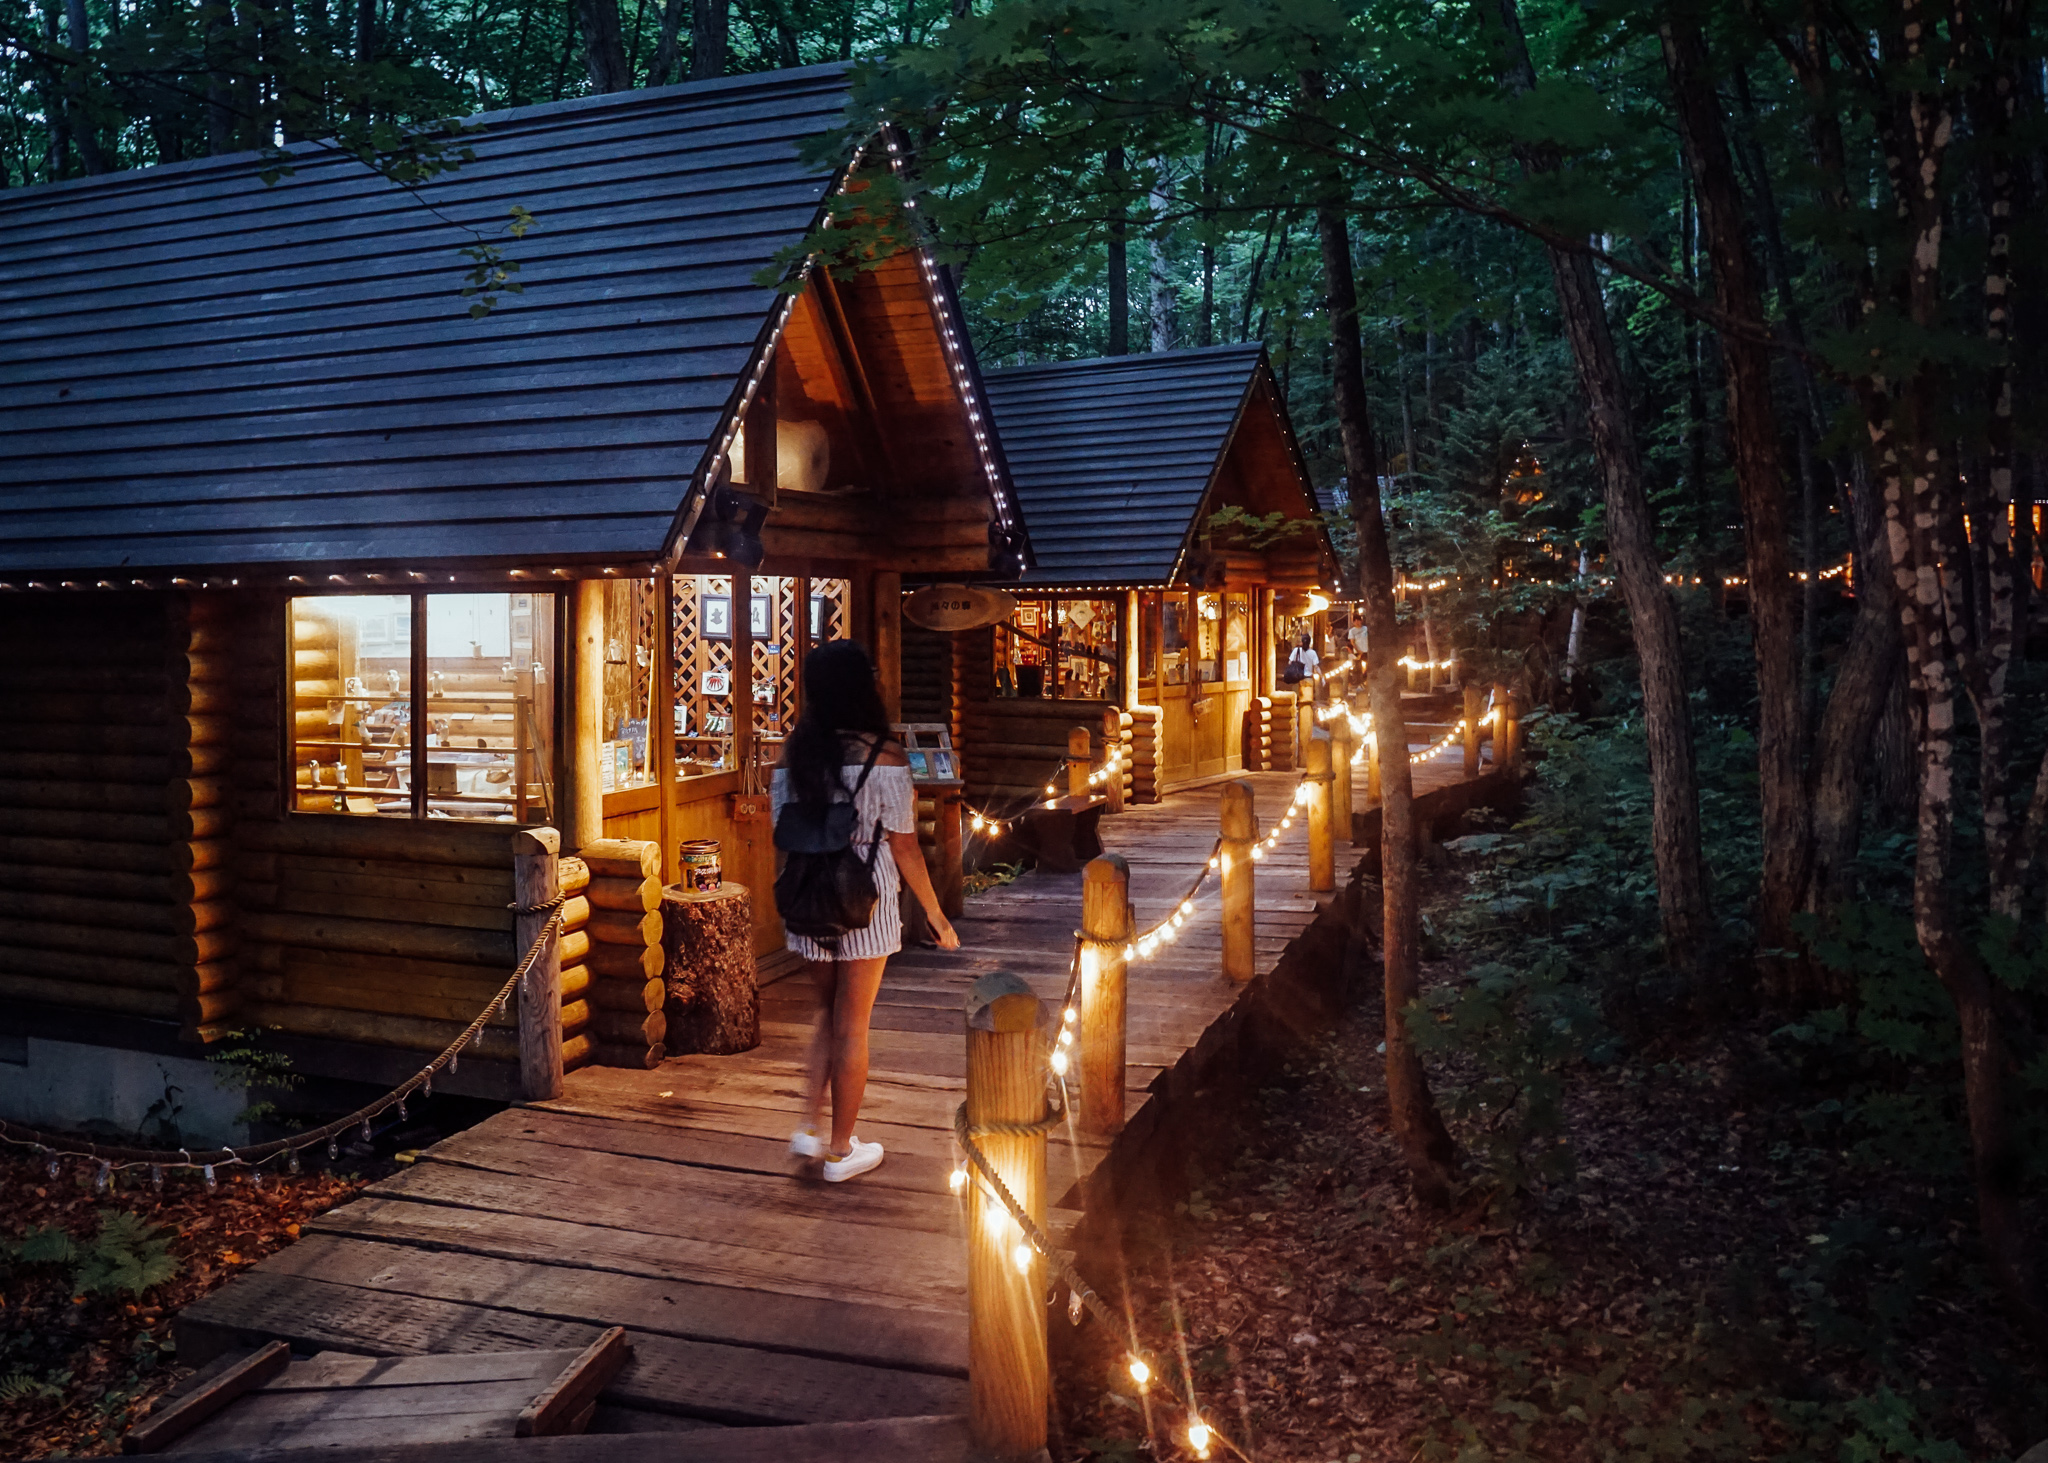 A girl walking a path next to some wooden huts lit up by fairy lights in a forest in Biei, Hokkaido